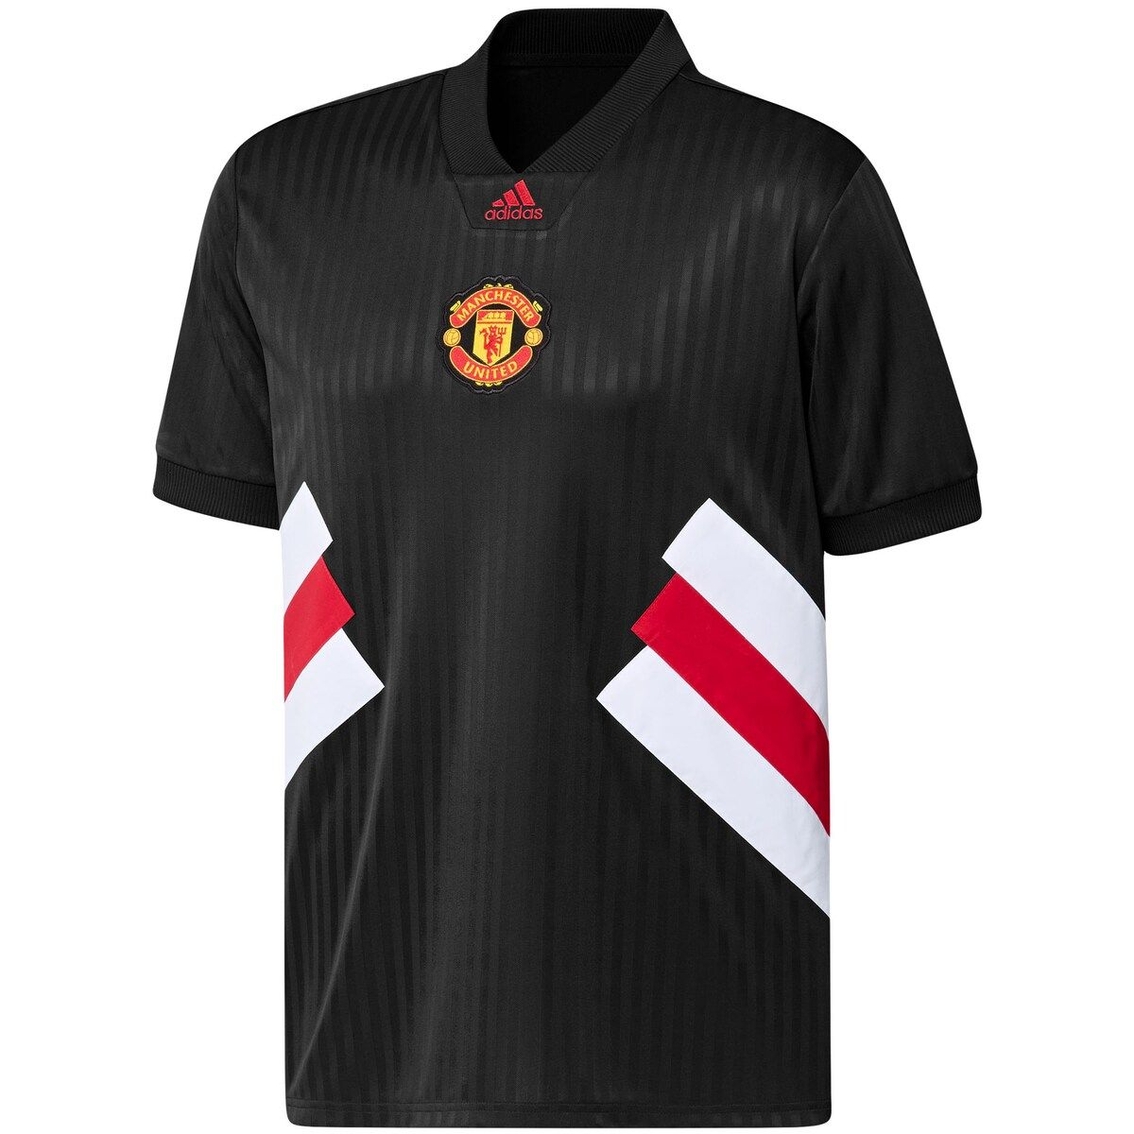 adidas Men's Black Manchester United Football Icon Jersey - Image 3 of 4